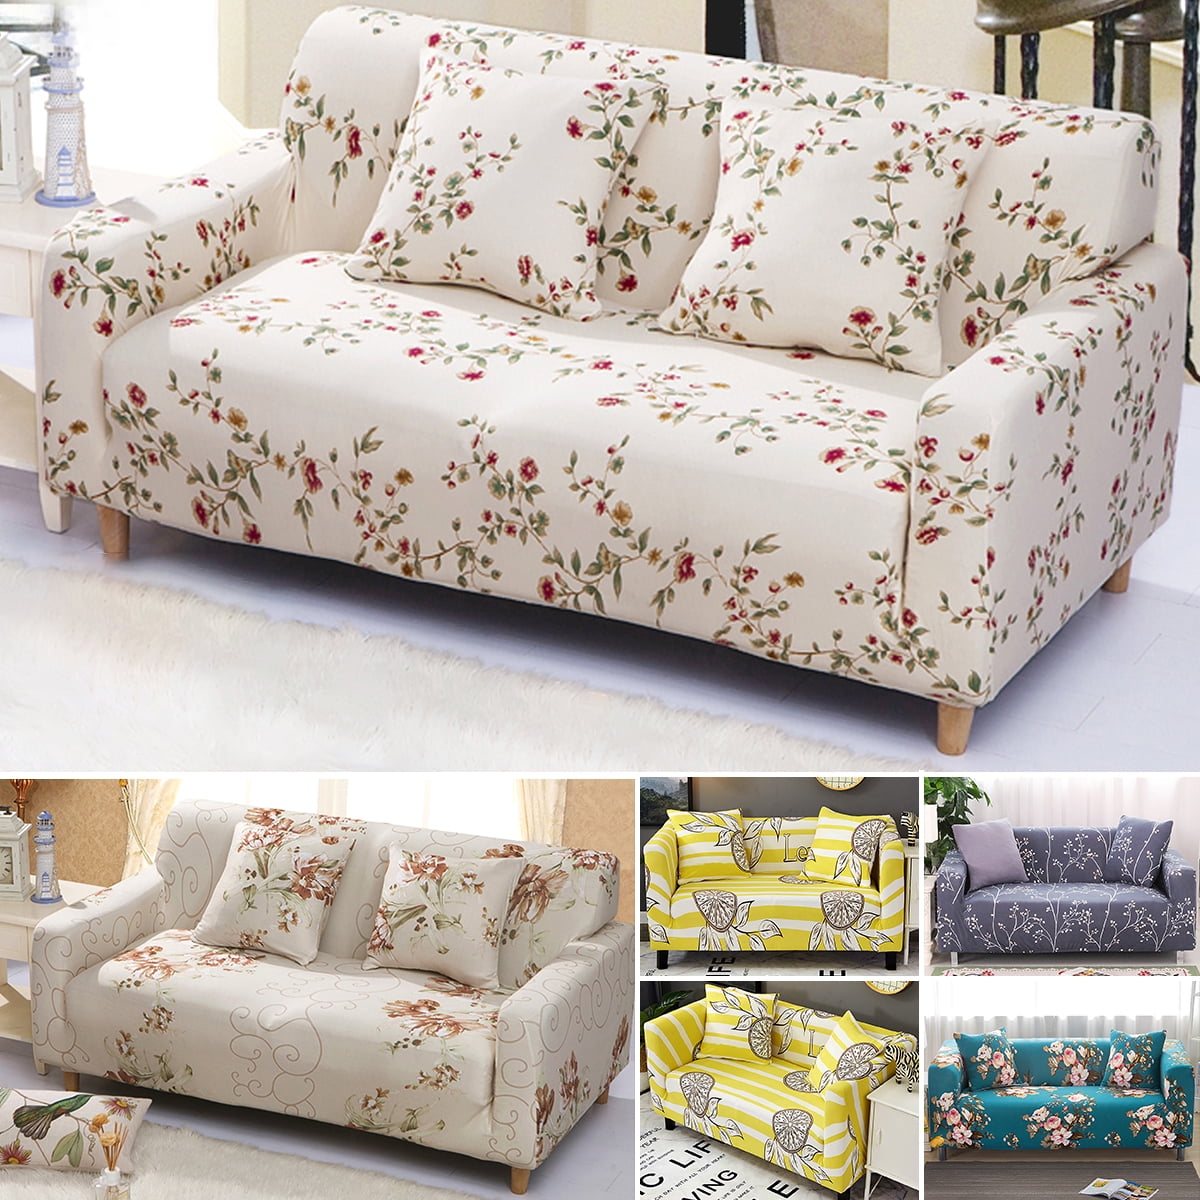 Floral Pattern Washable Sofa Cover Soft Loveseat Slipcover Furniture Protector 